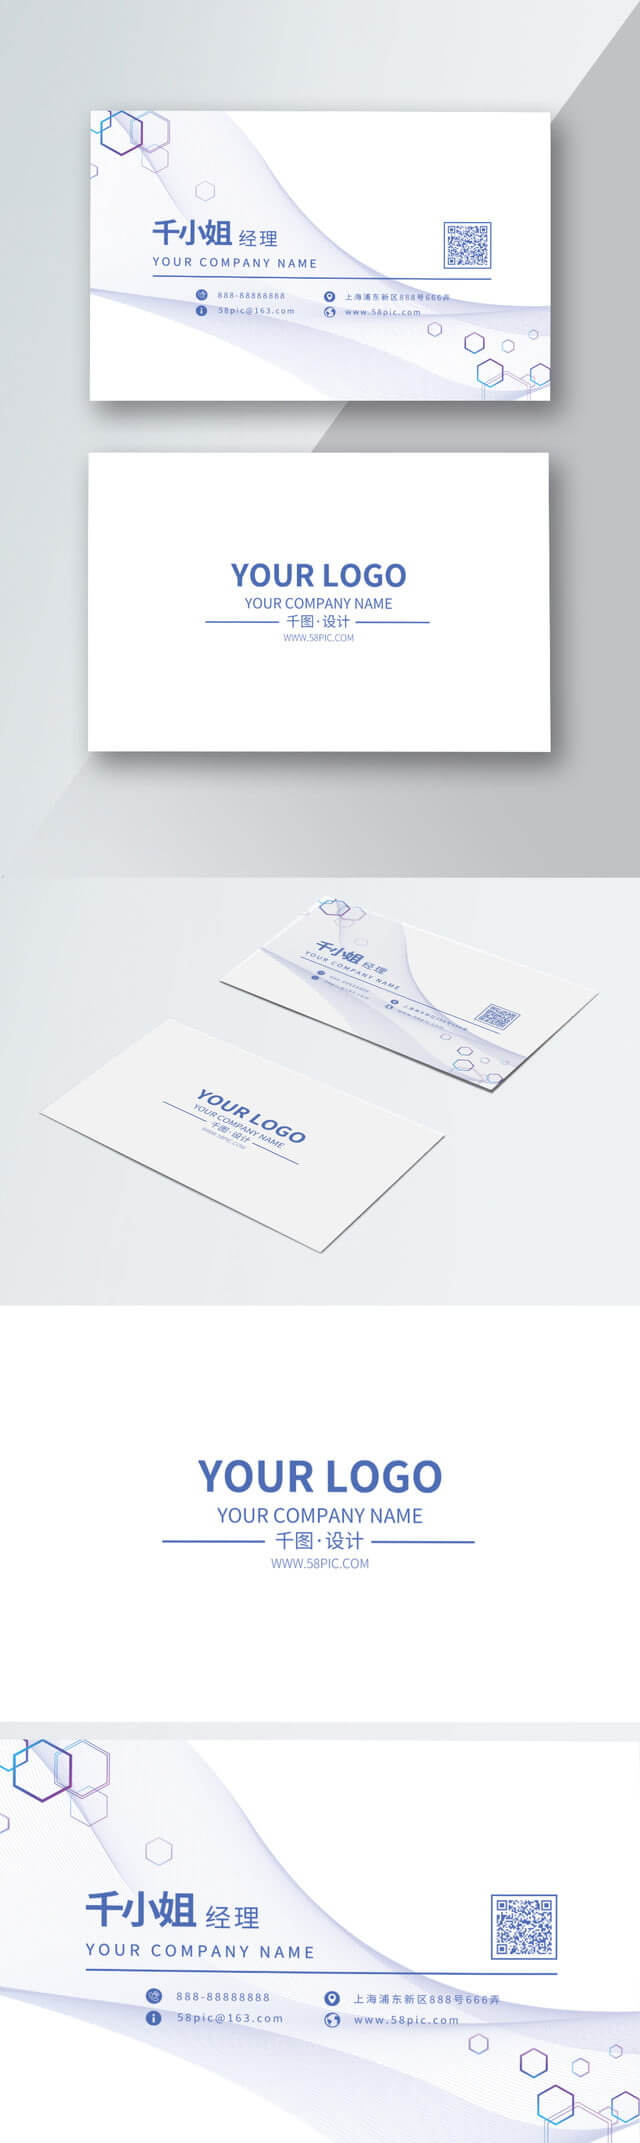 Bio Business Card Bio Technology Business Card Vector Intended For Bio Card Template